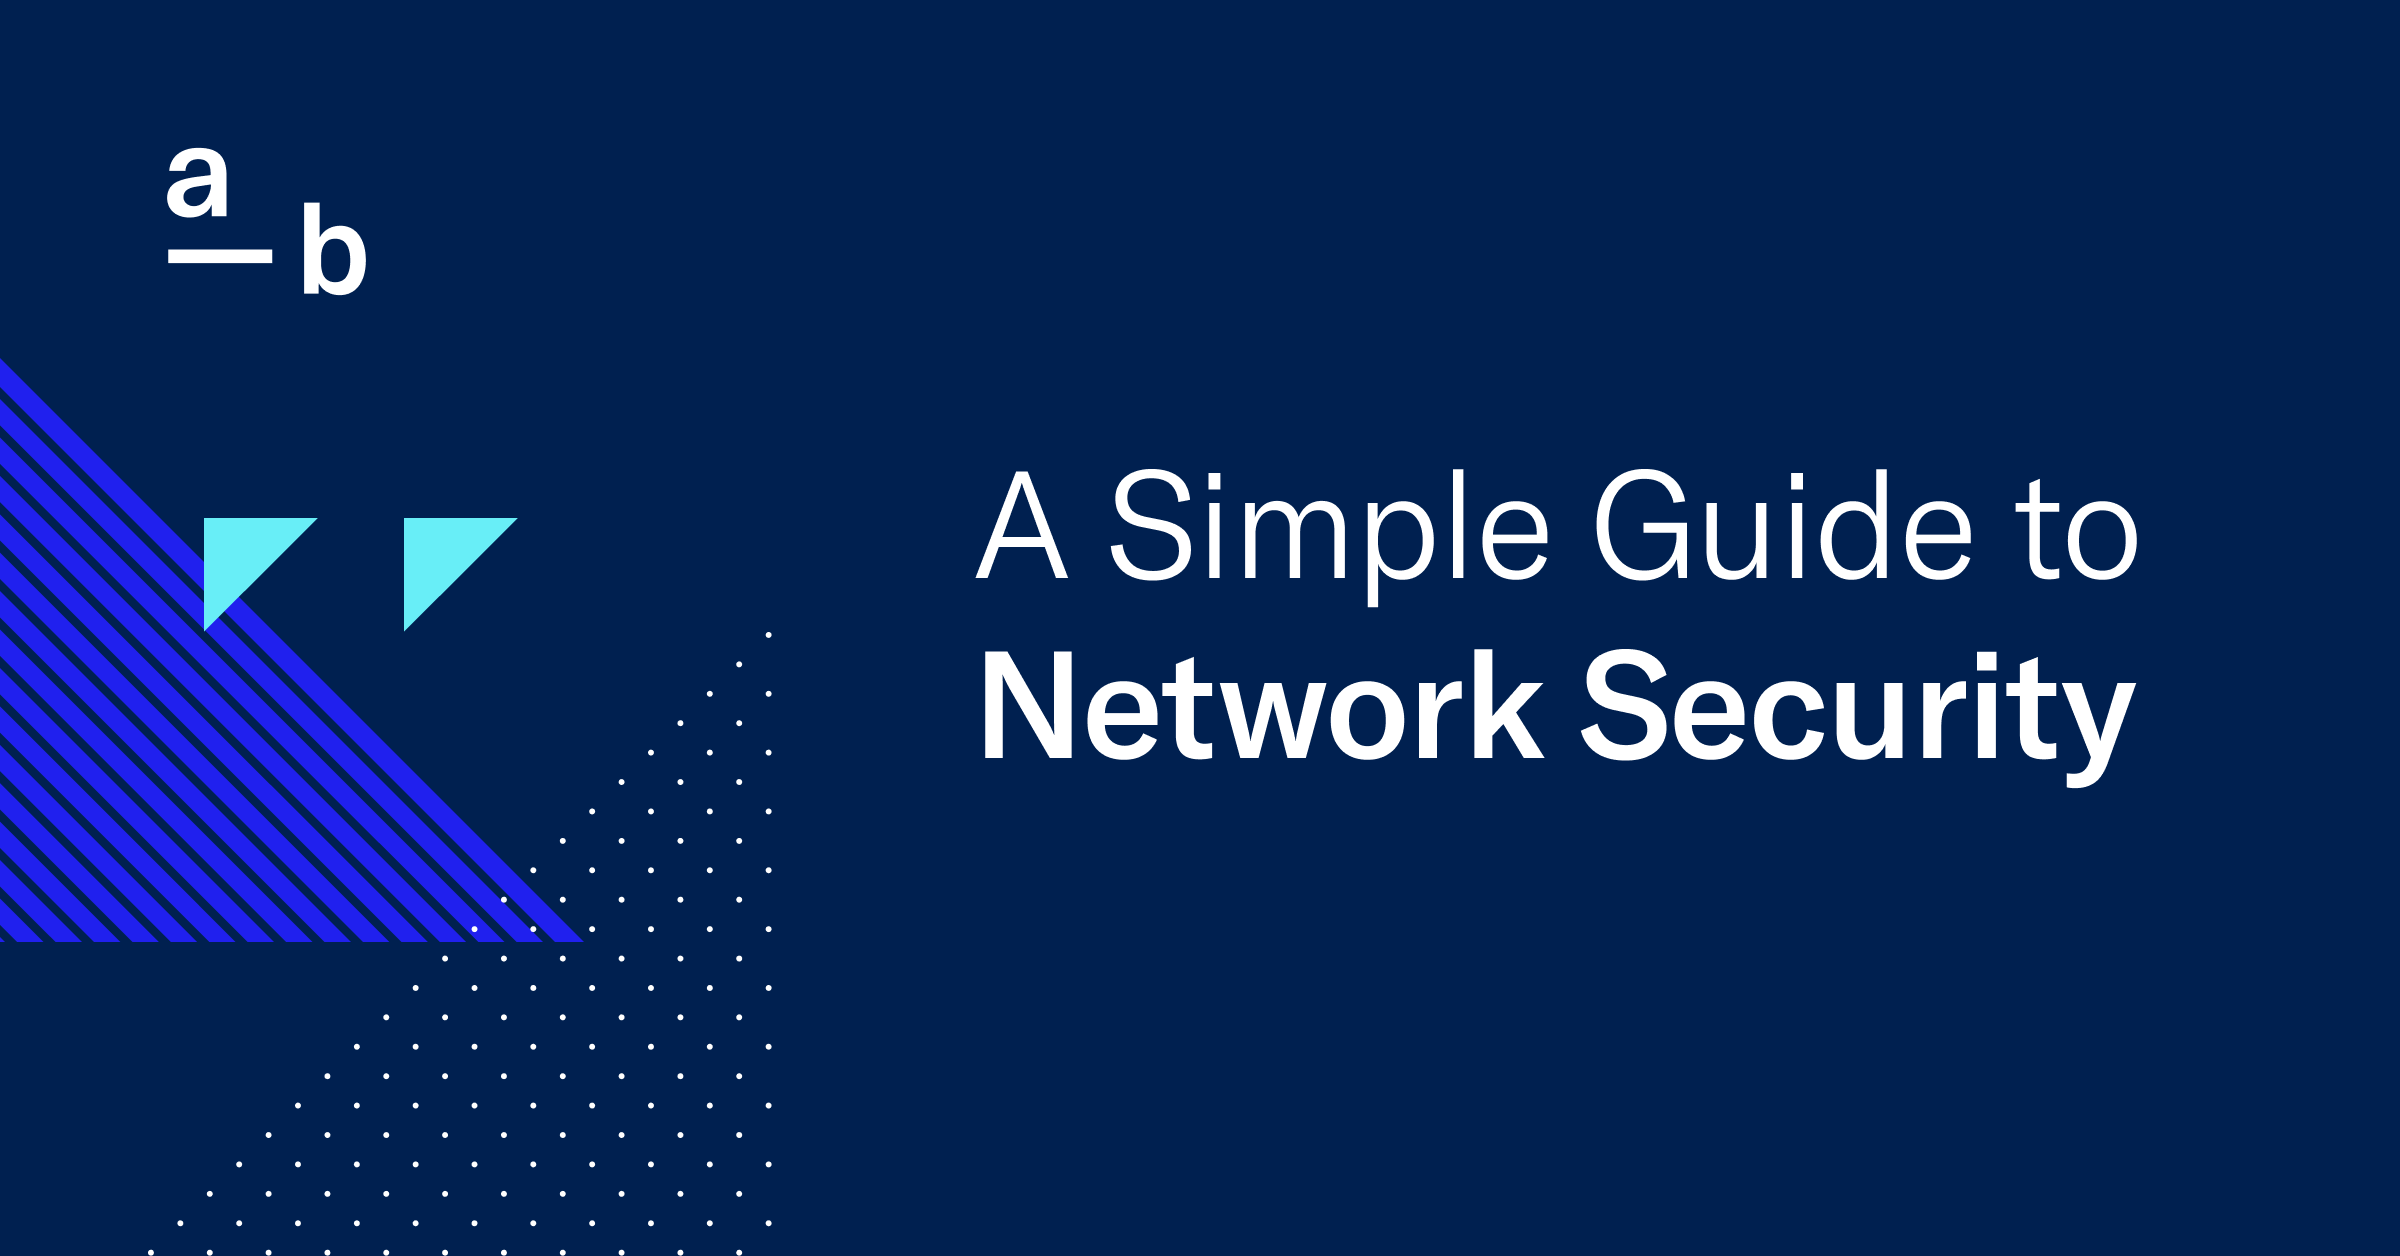 A Simple Guide to Network Security